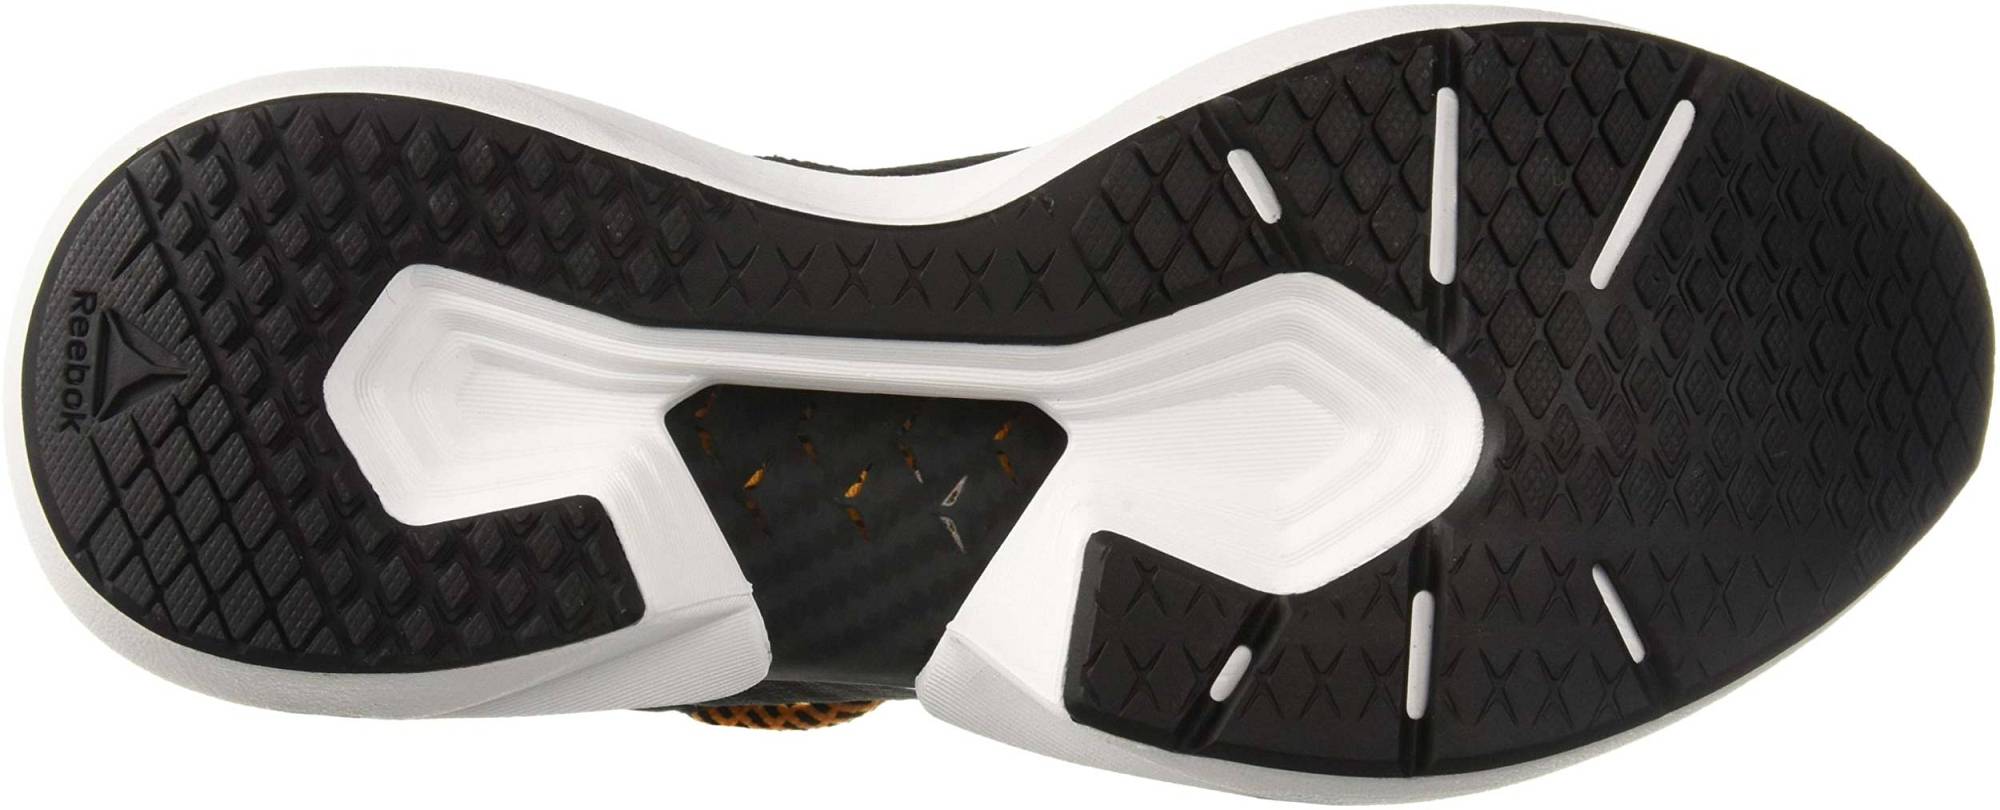 Reebok Sole Fury SE – Shoes Reviews & Reasons To Buy